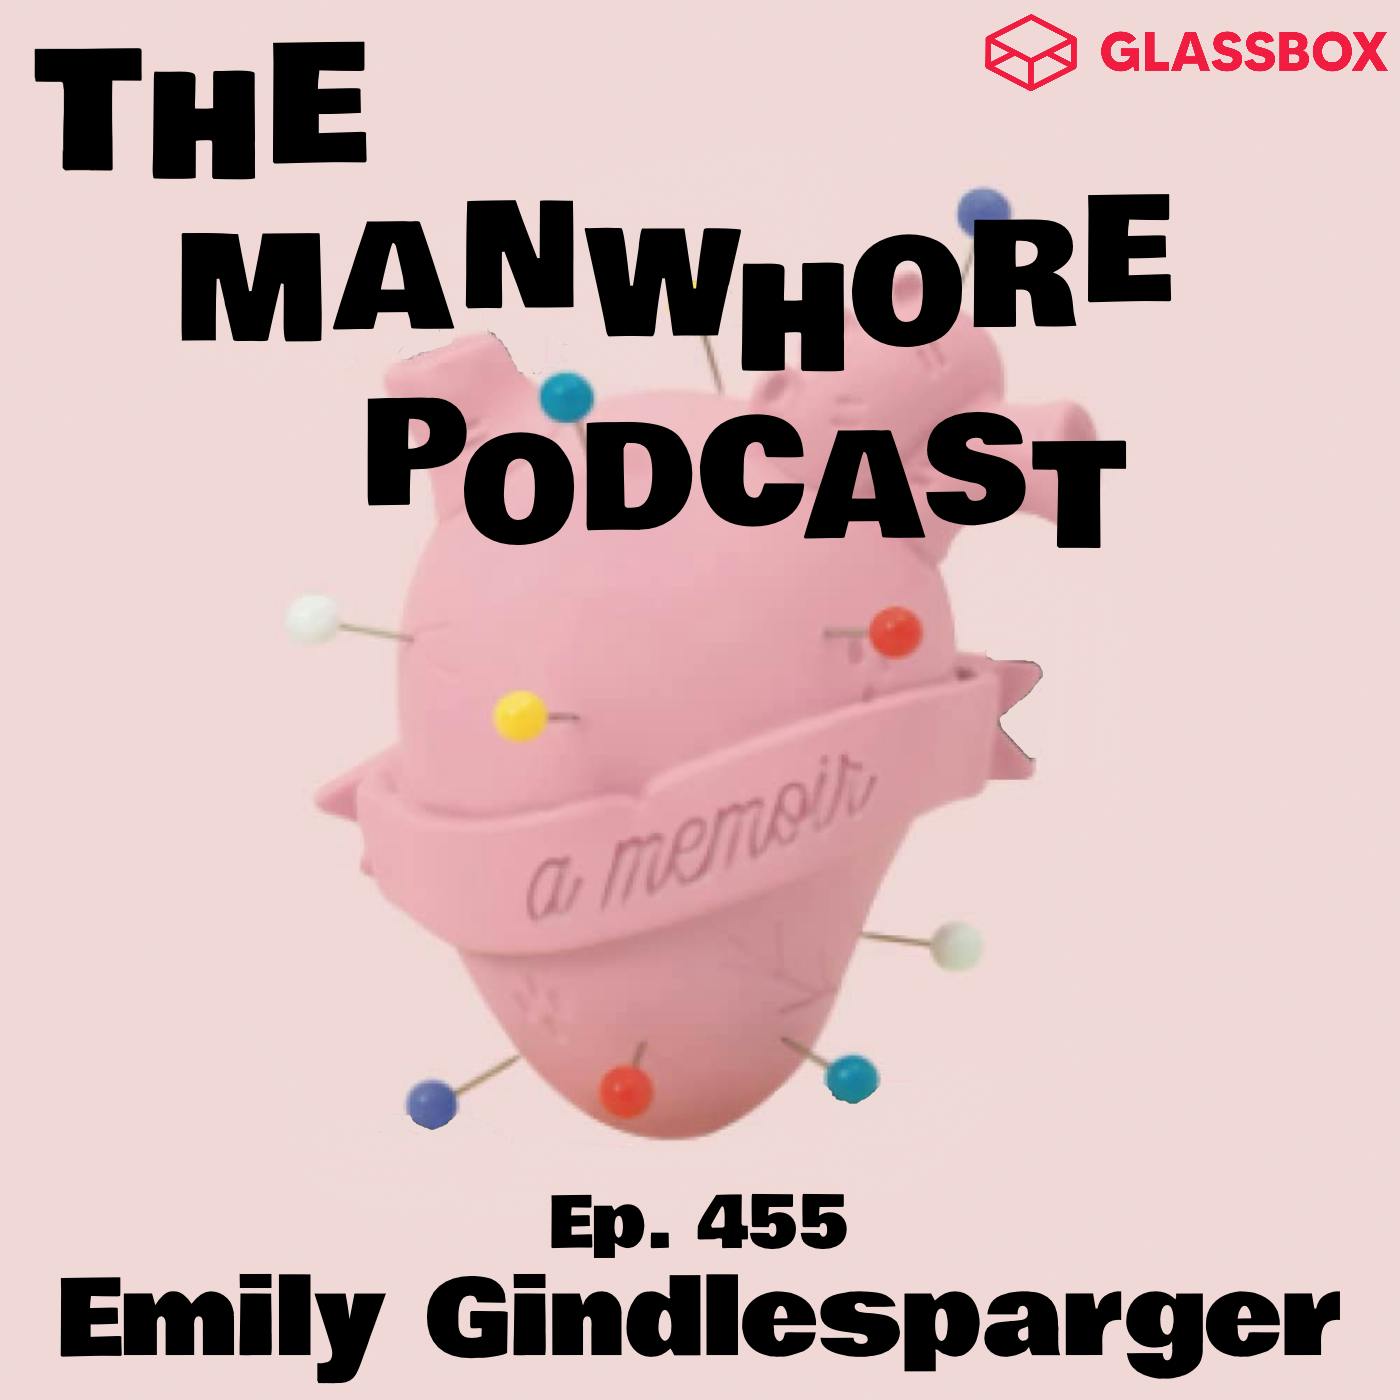 The Manwhore Podcast: A Sex-Positive Quest - Ep. 455: Learning to Date Women (while dating a man) with Emily Gindlesparger